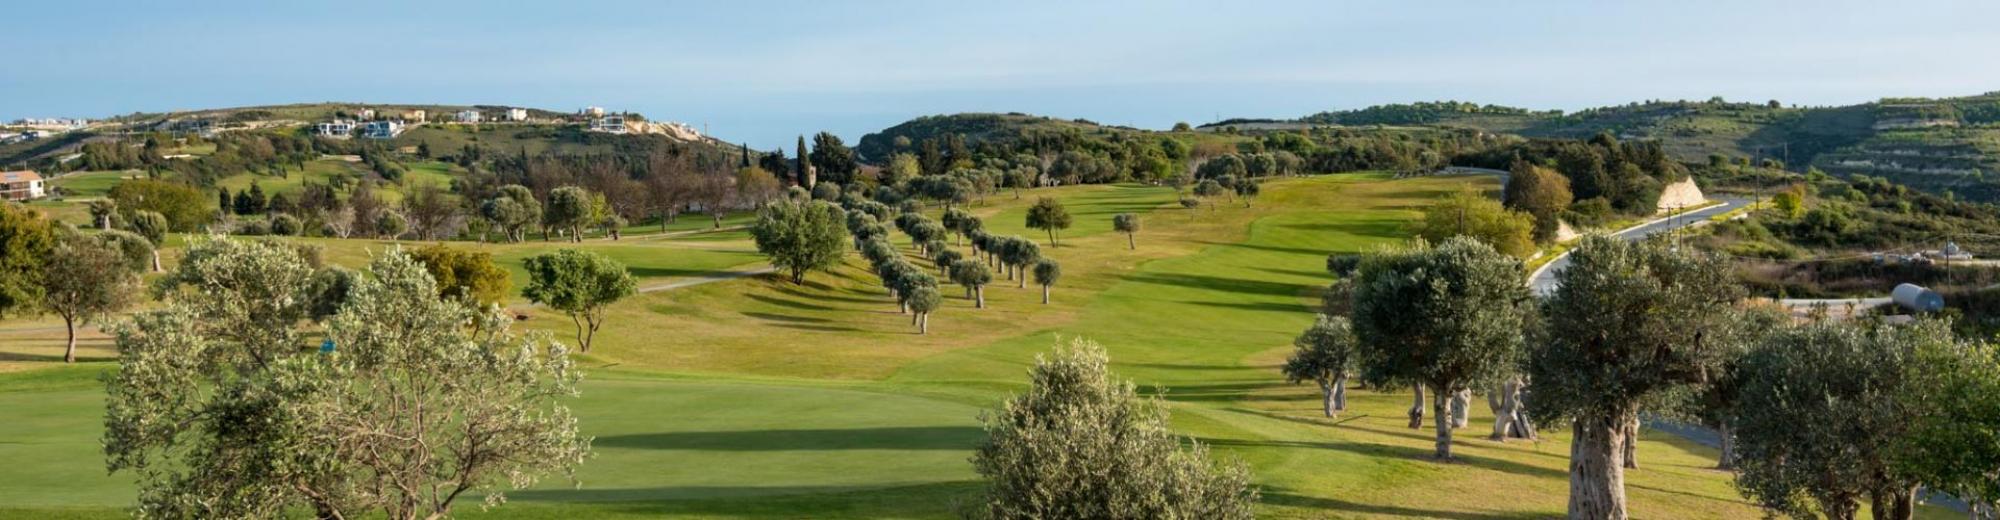 The Minthis Hills Golf Club's impressive golf course situated in gorgeous Paphos.